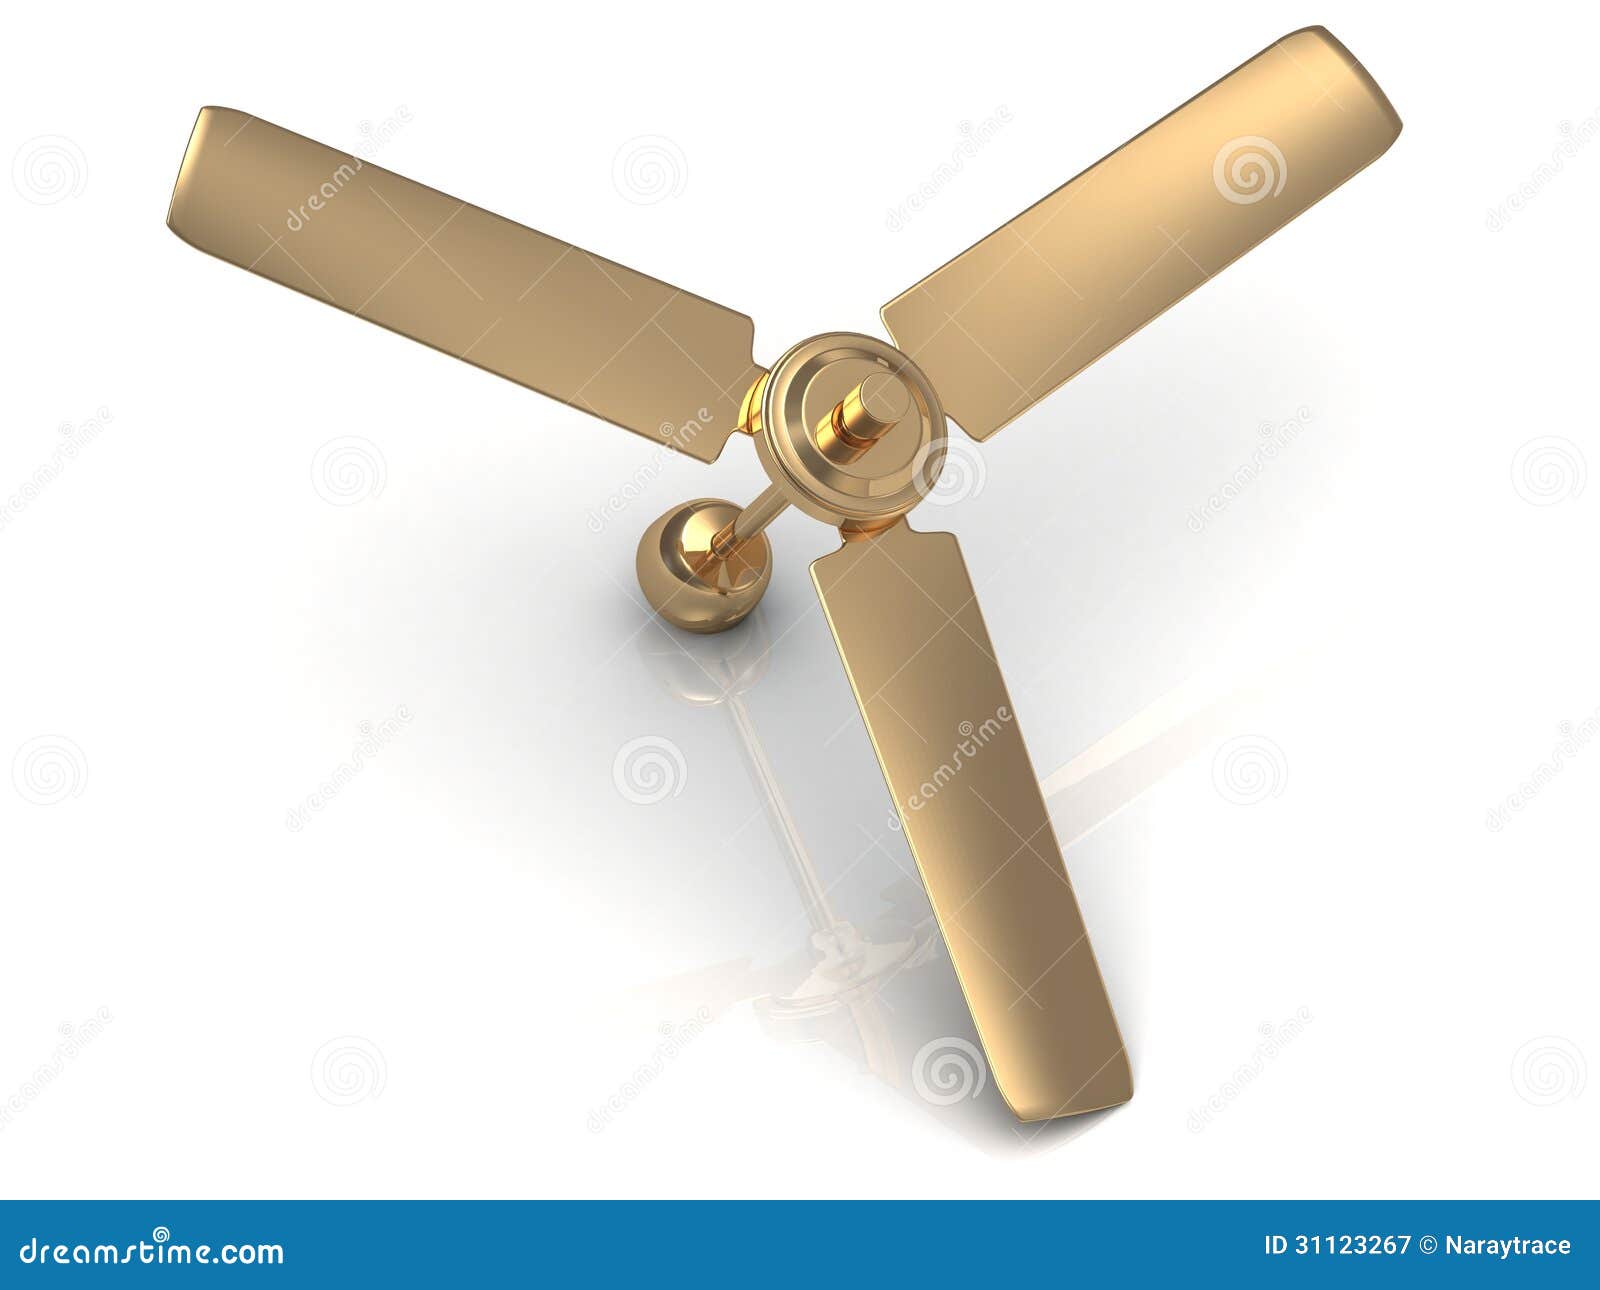 Gold ceiling fan with a reflective surface on white background.